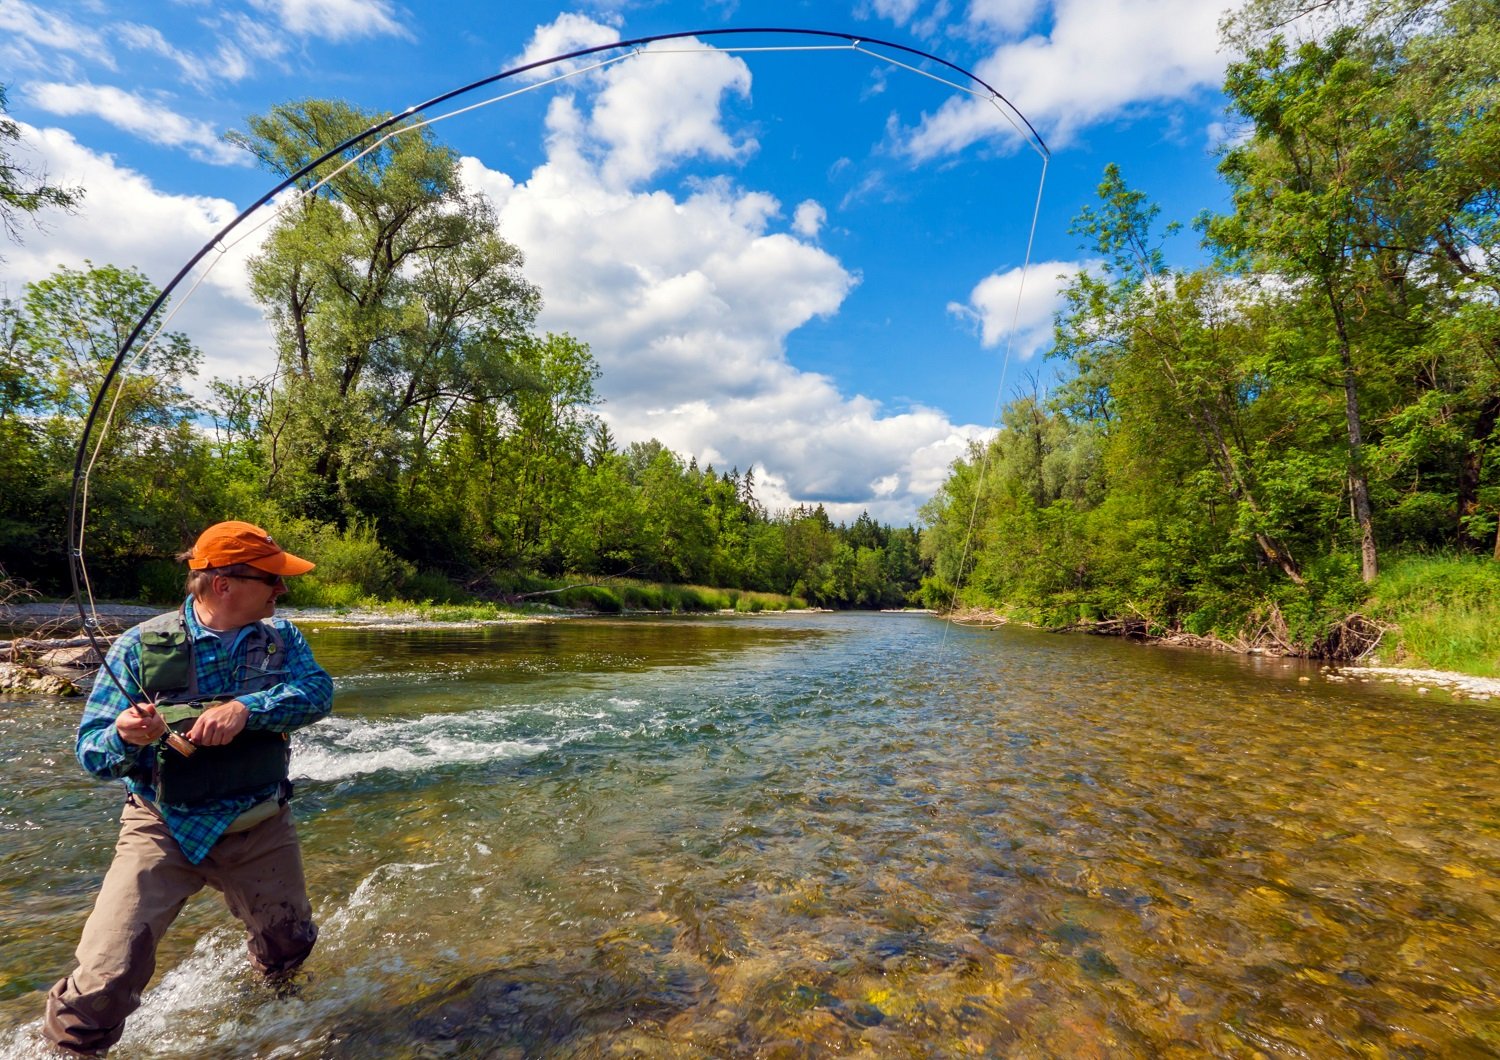 A fisherman is flyfishing in a beautiful River on a perfect Day.